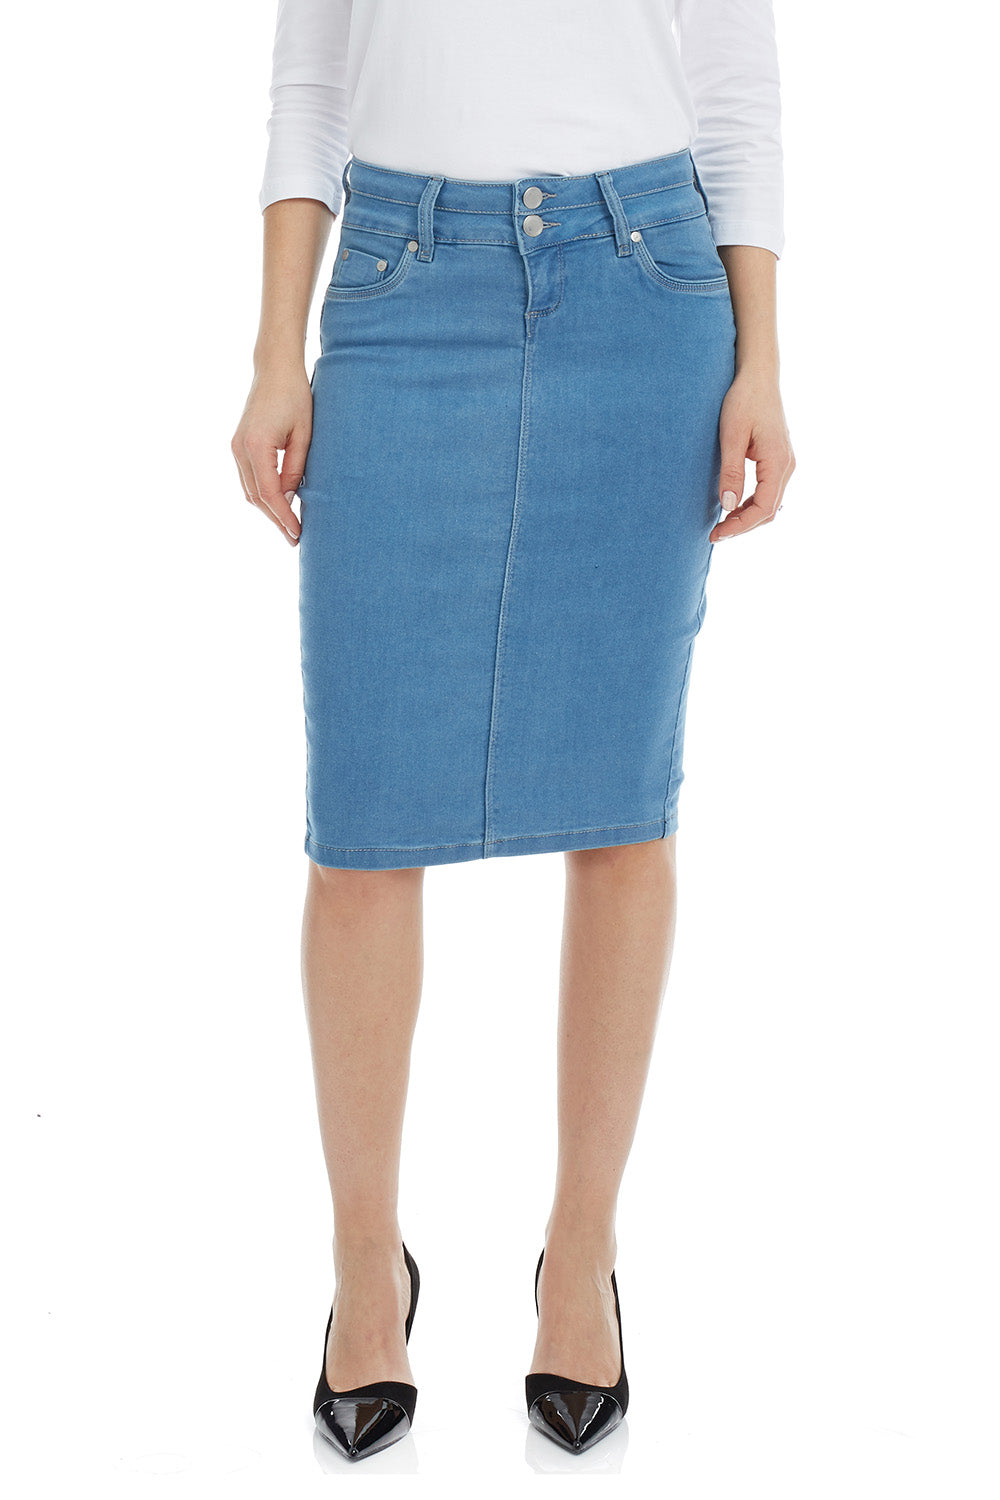 tznius light blue denim pencil skirt for women with pockets and belt loops